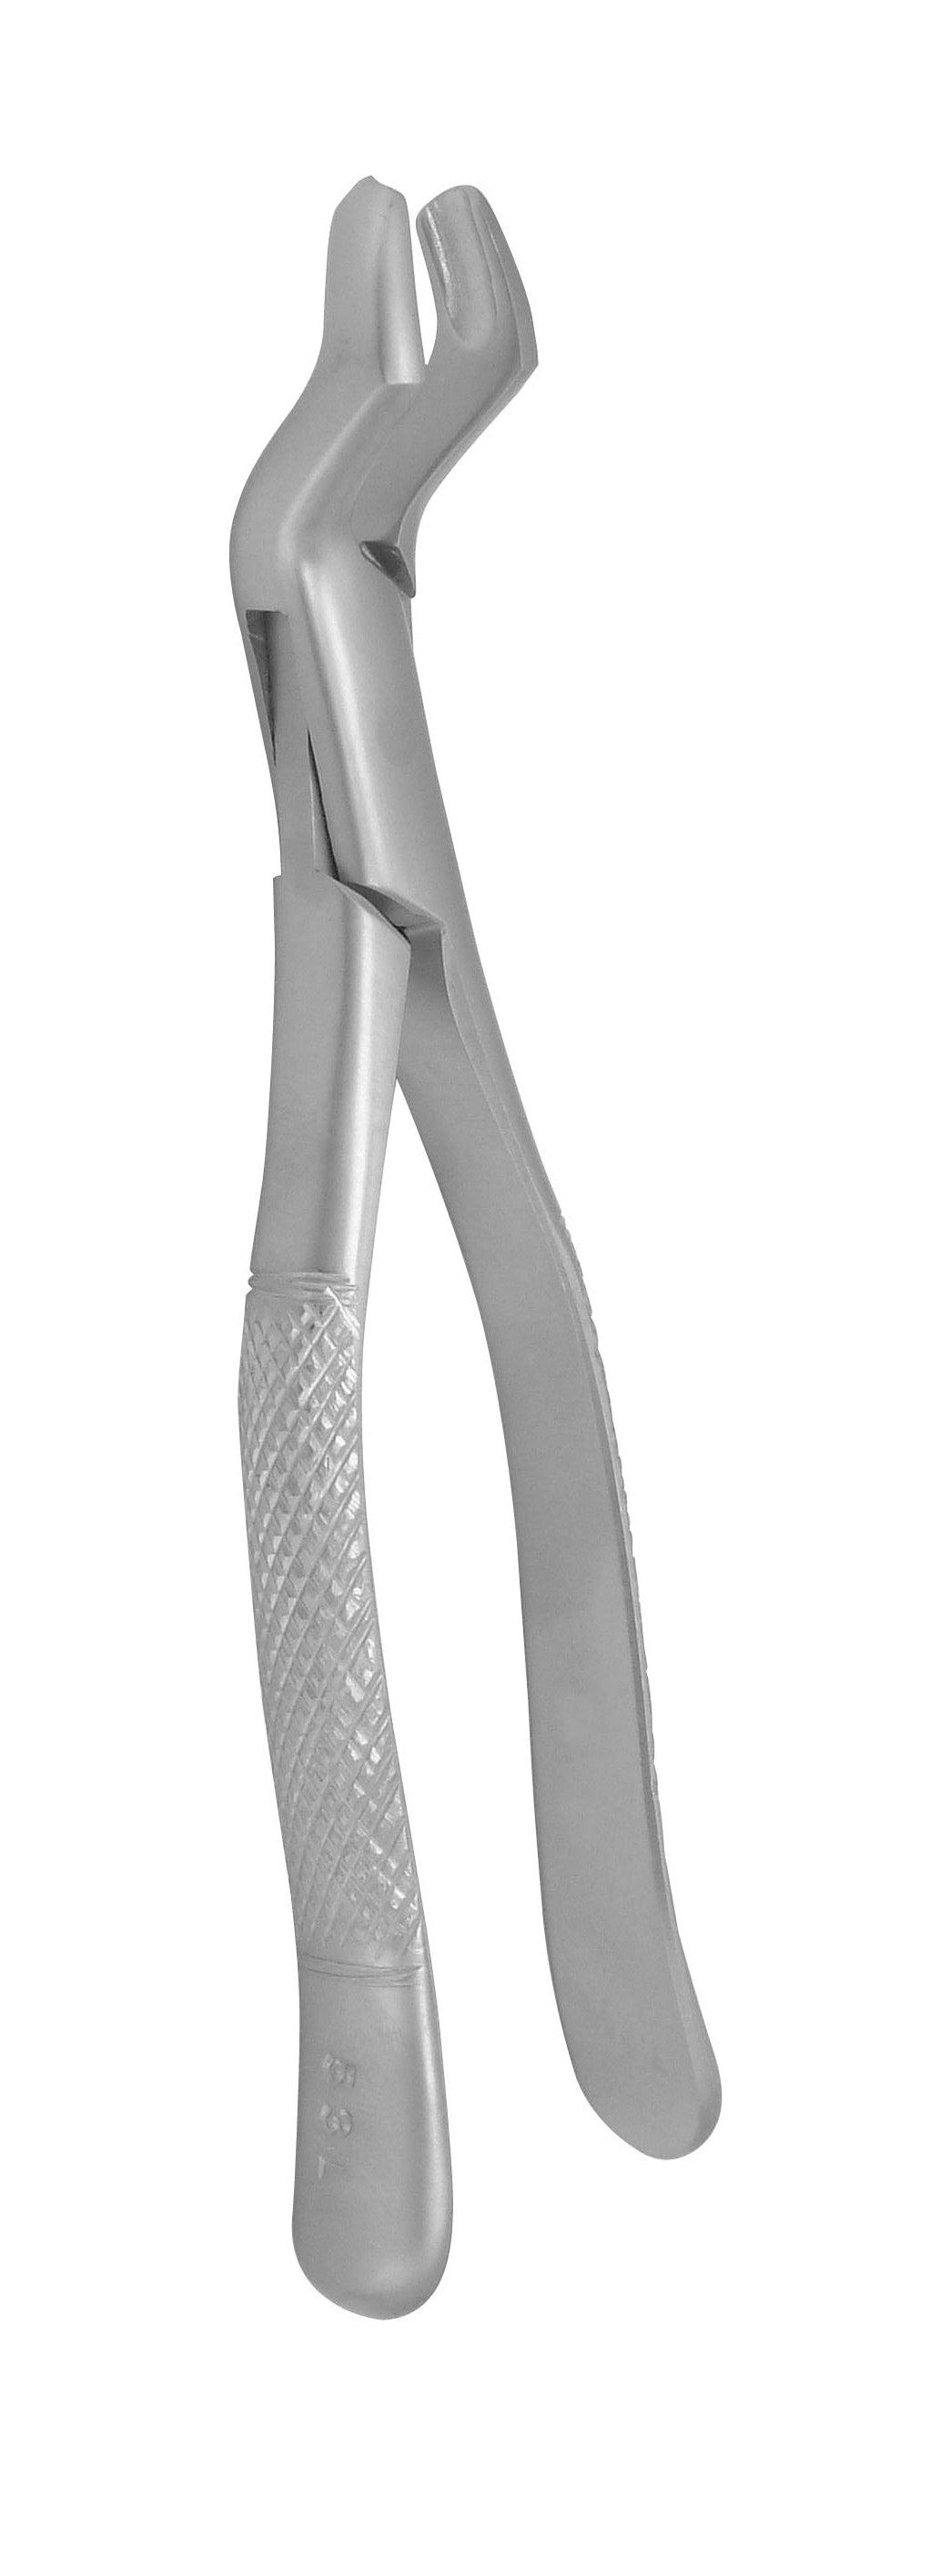 Extraction Forceps 53L